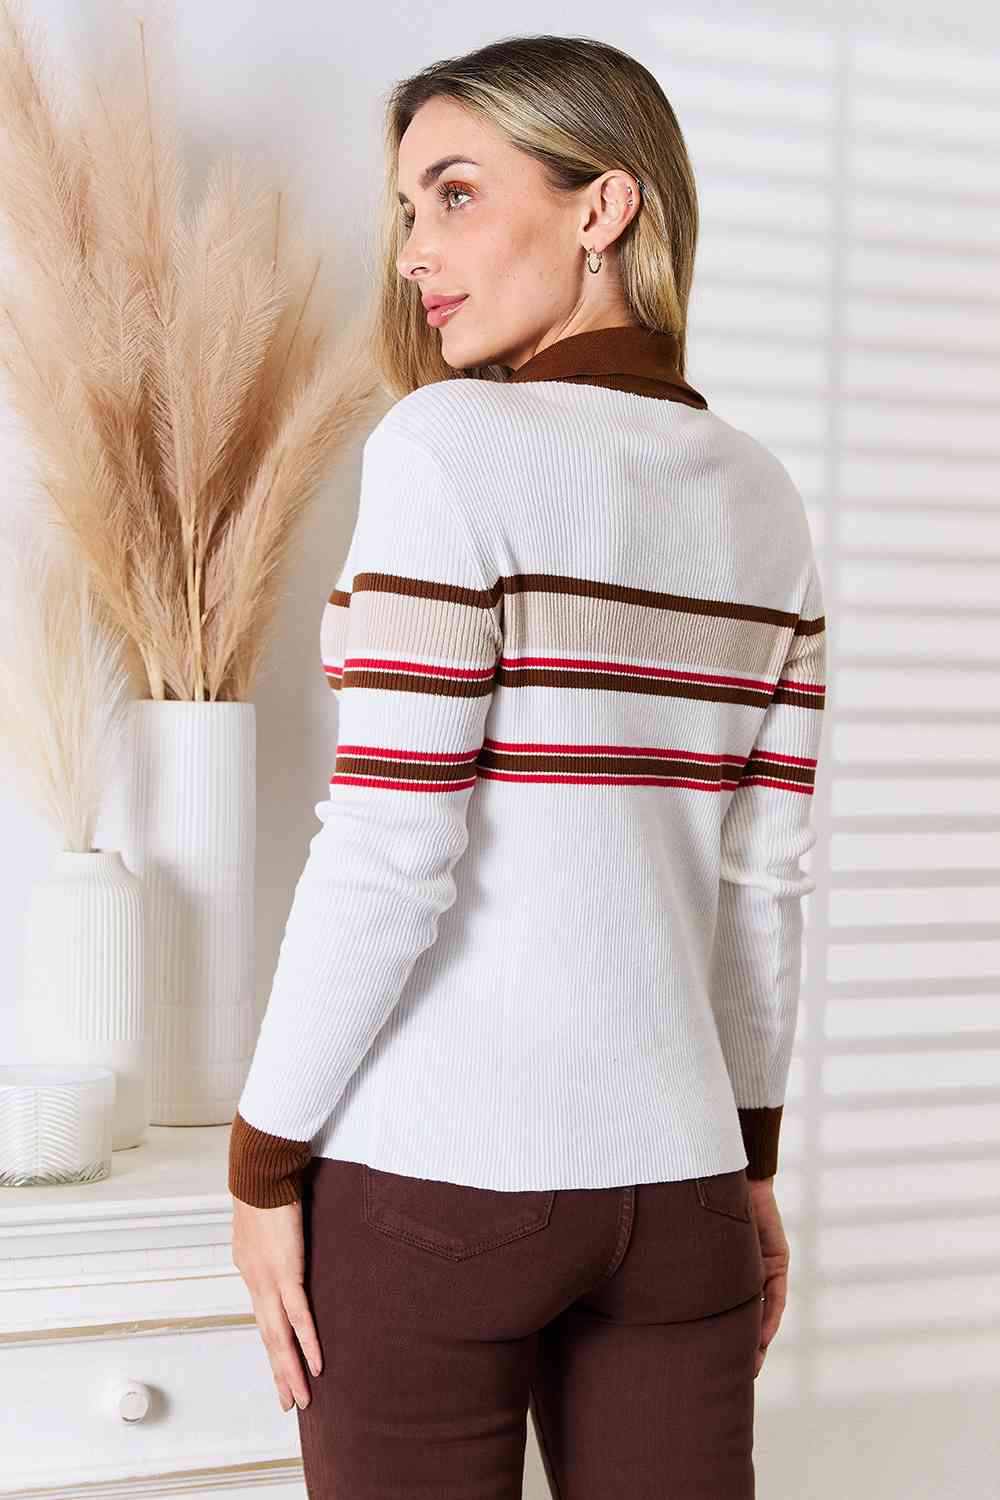 Striped Collared Neck Rib-Knit Top - Women’s Clothing & Accessories - Shirts & Tops - 6 - 2024